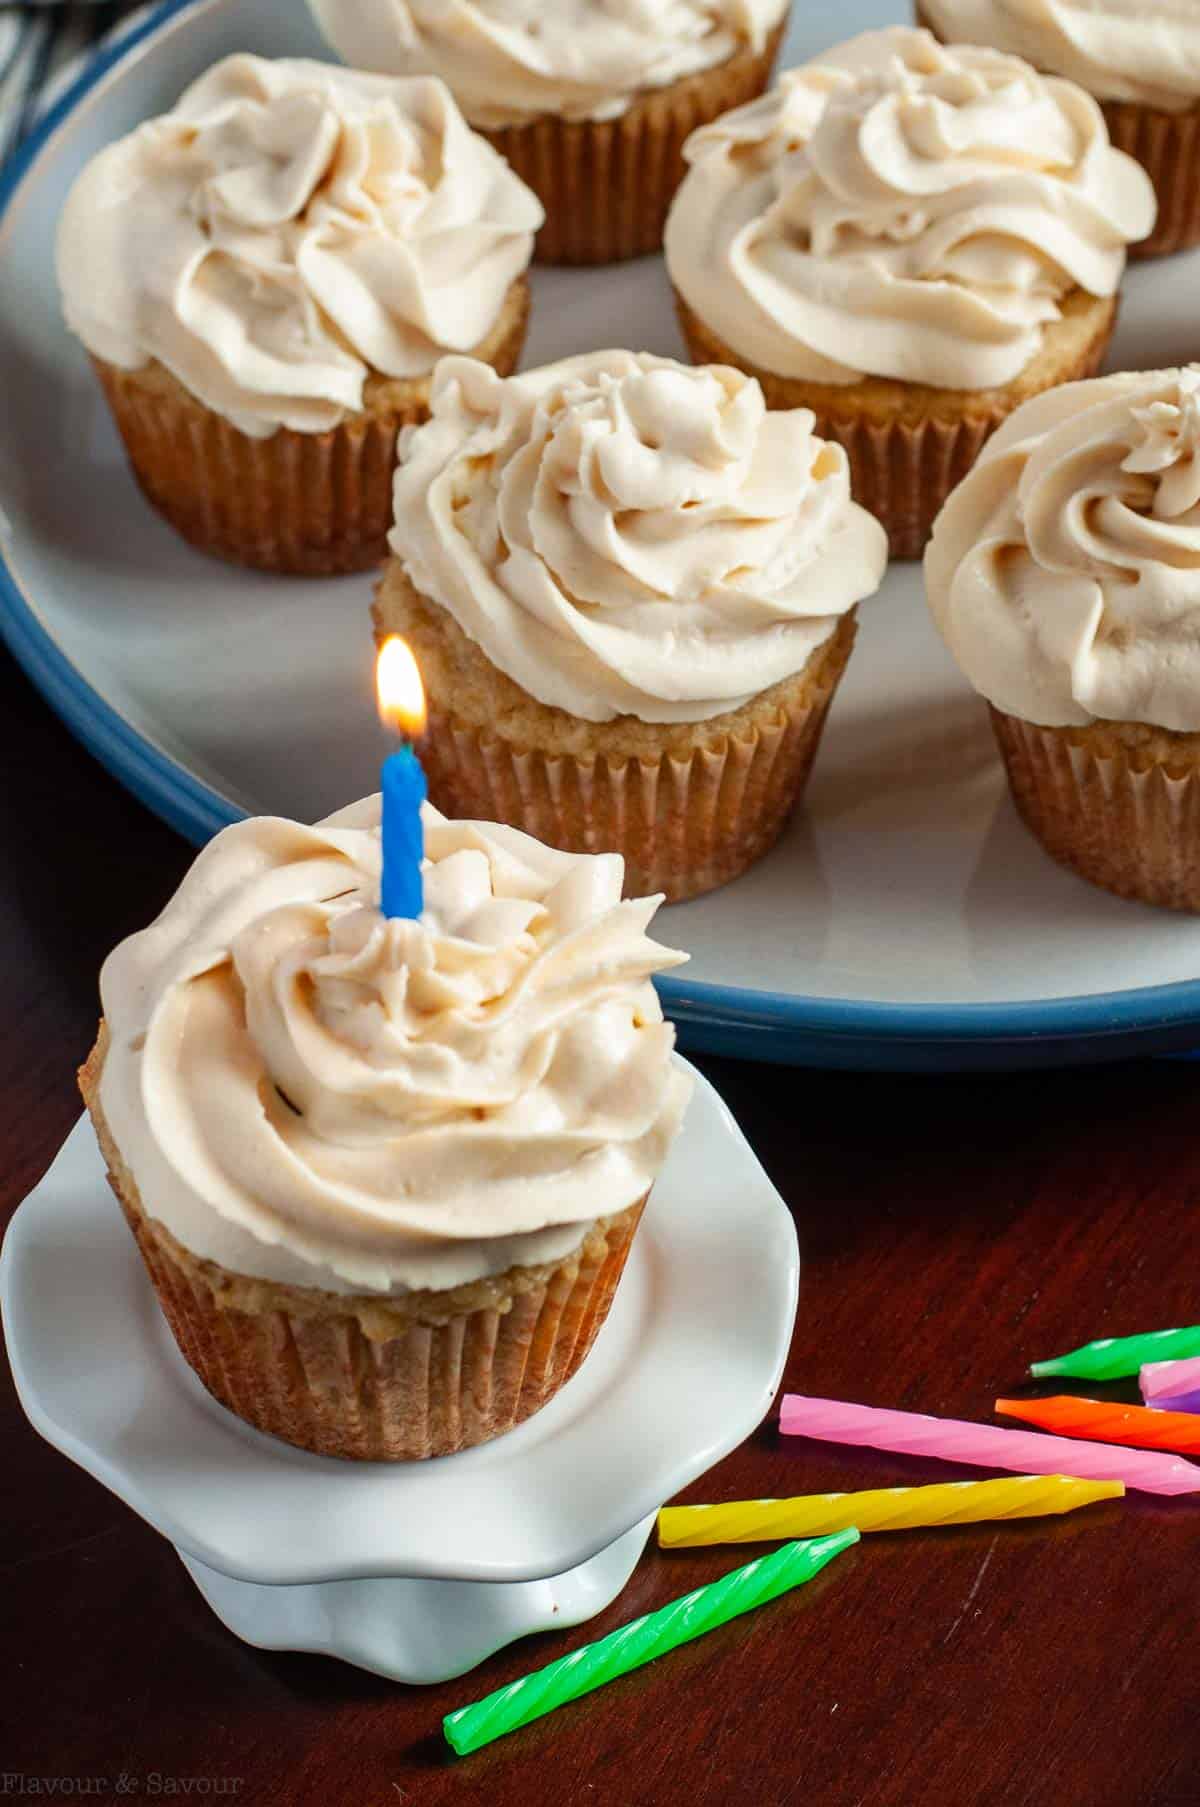 Grain-free Banana Cupcake with cream cheese frosting and a candle